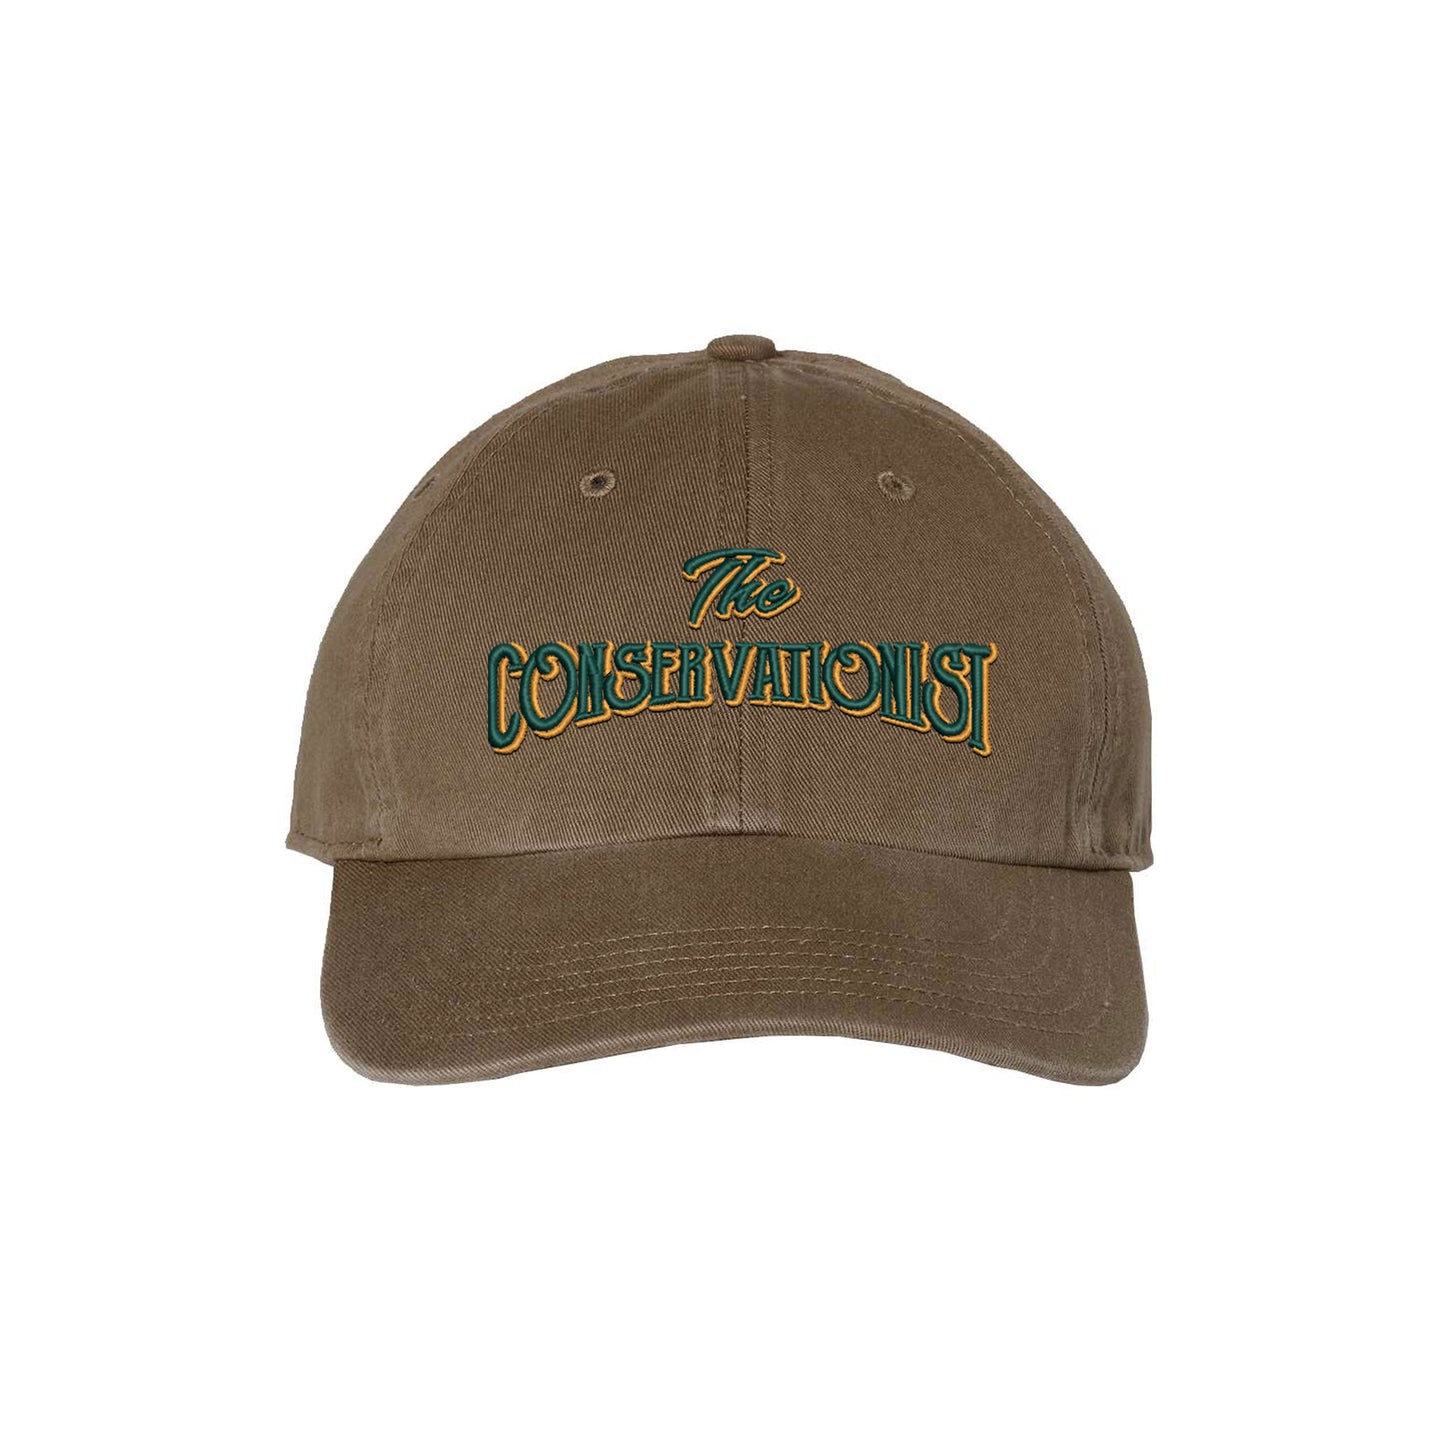 CR The Conservationist Chino Hat